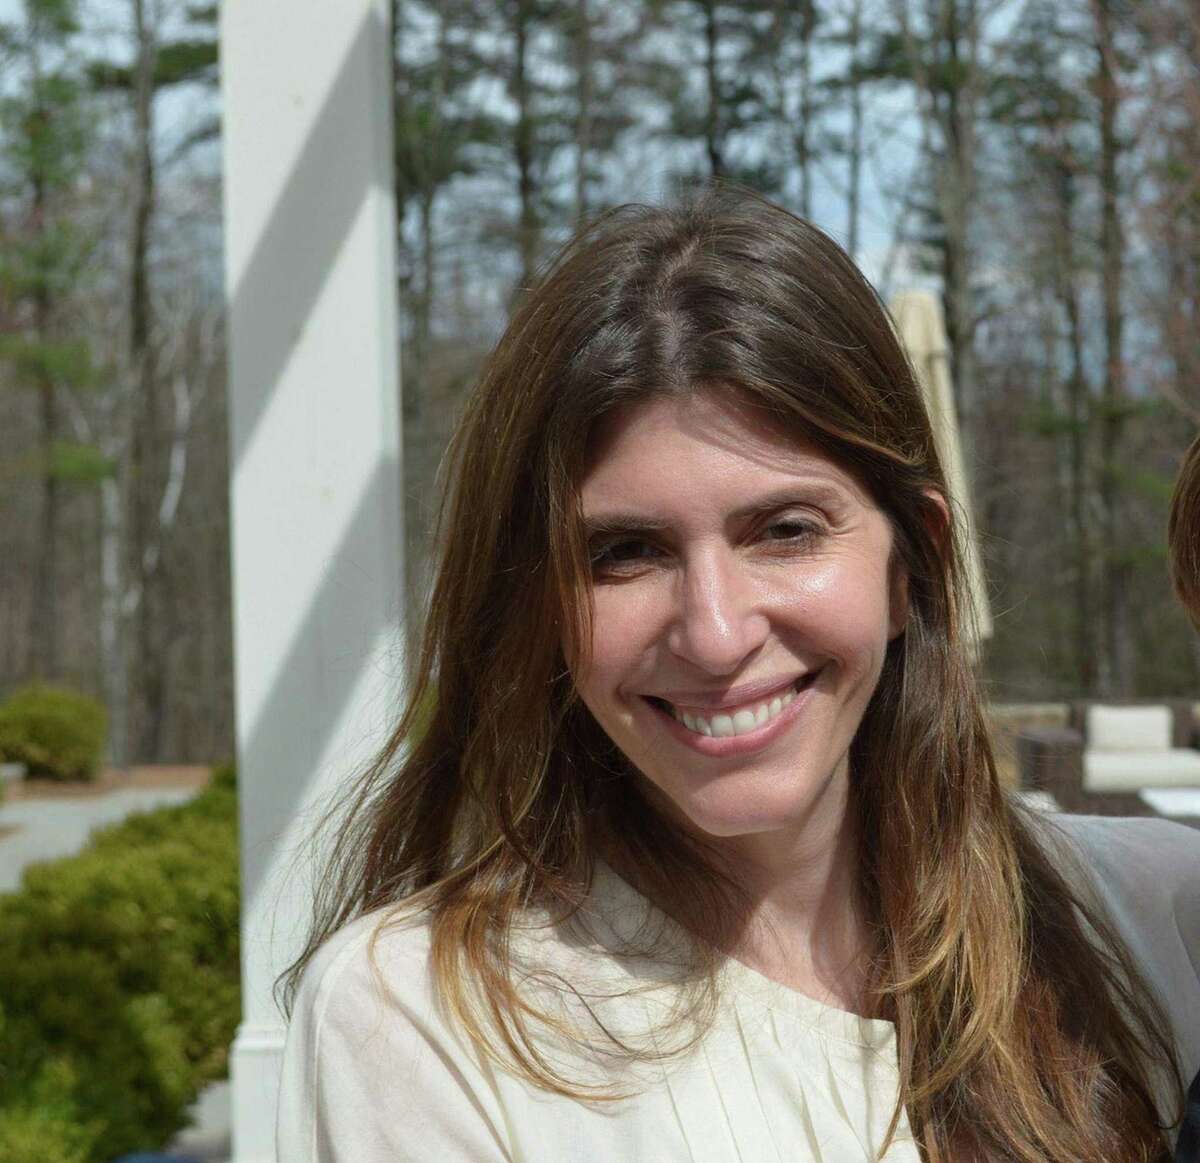 Jennifer Farber Dulos, mother of five, went missing after dropping off her kids at school on May 24, 2019.